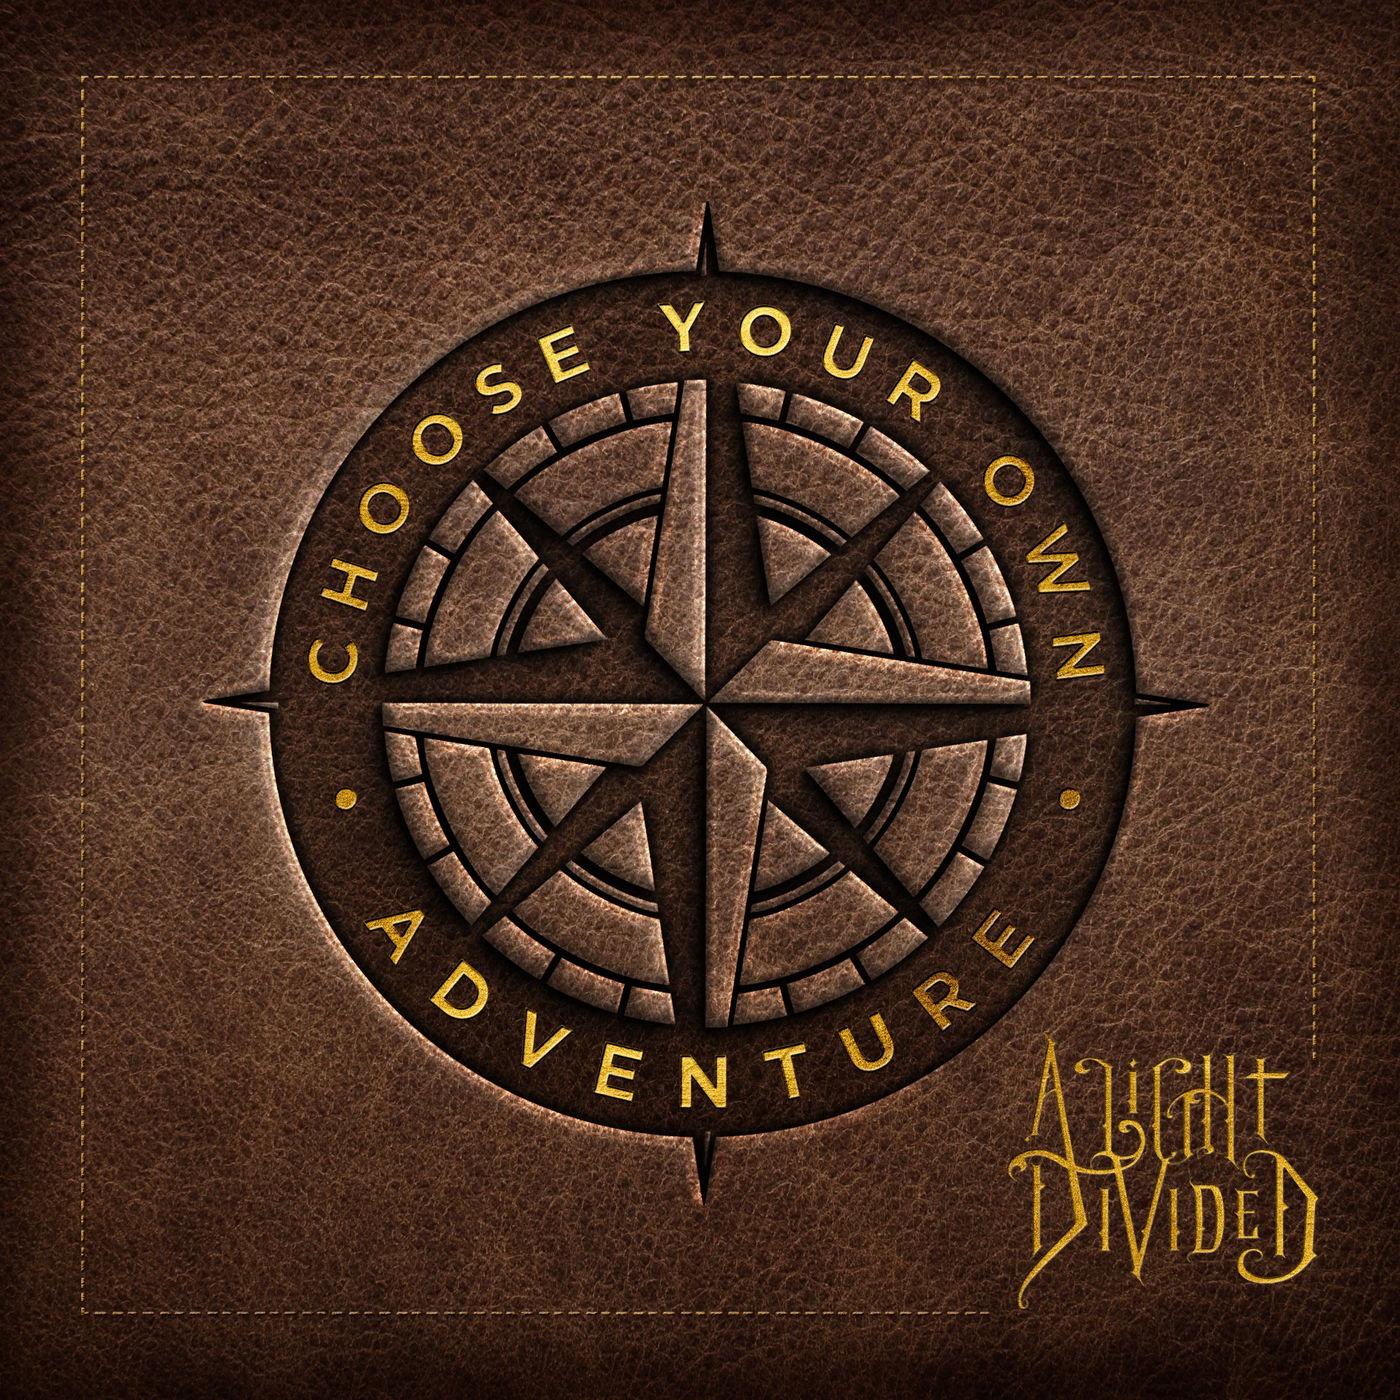 A Light Divided - Choose Your Own Adventure (2018) Album Info